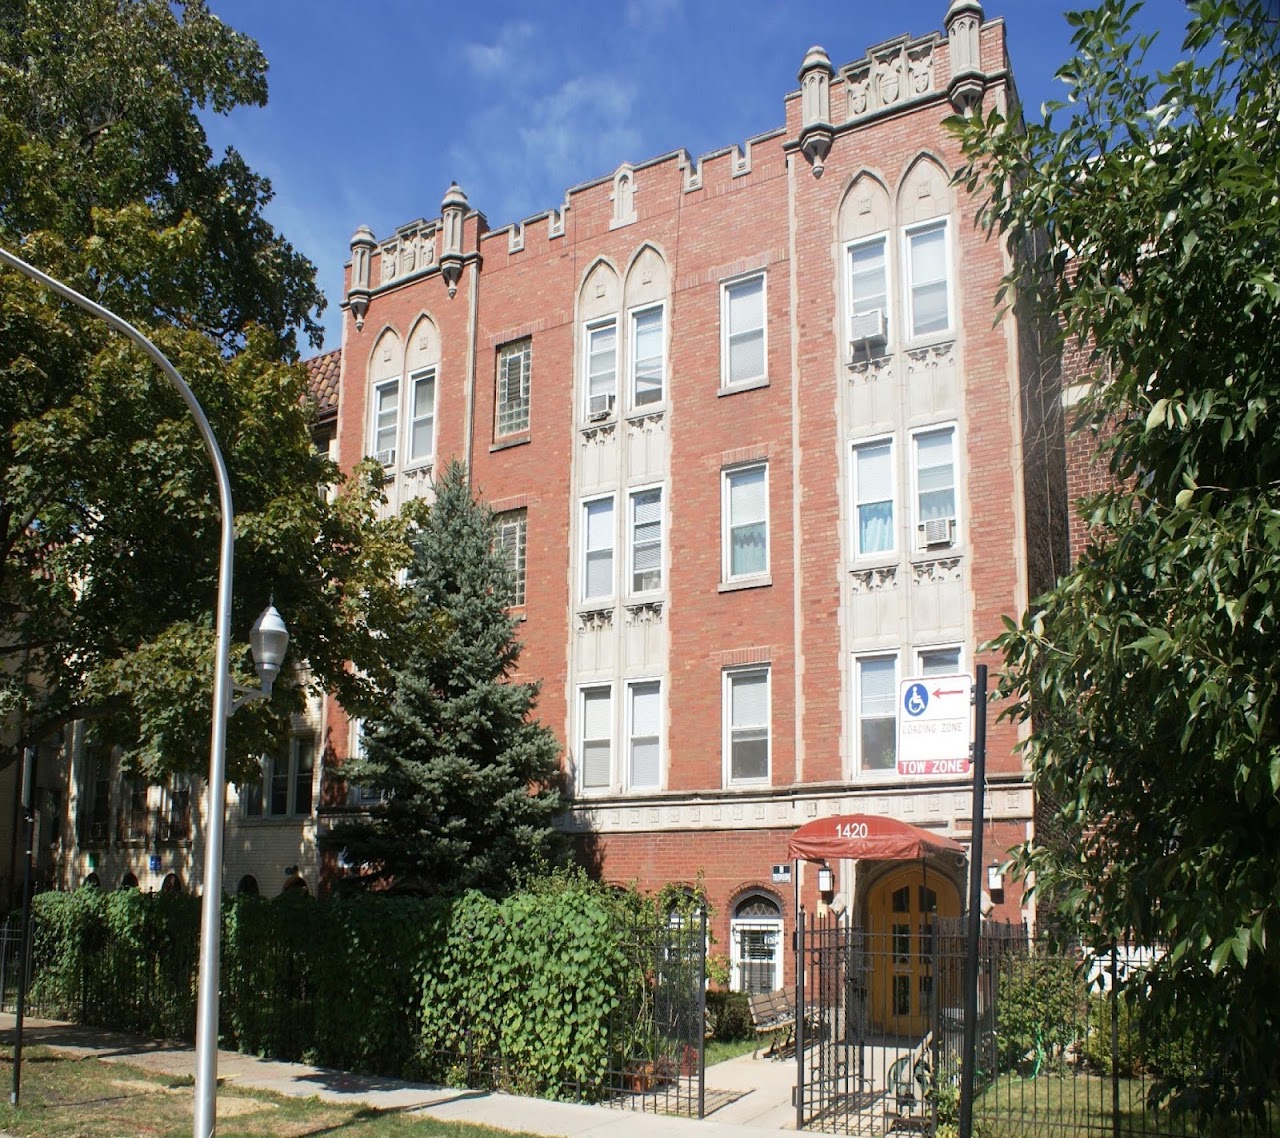 Photo of FARWELL JARVIS. Affordable housing located at 1418 W FARWELL AVE CHICAGO, IL 60626